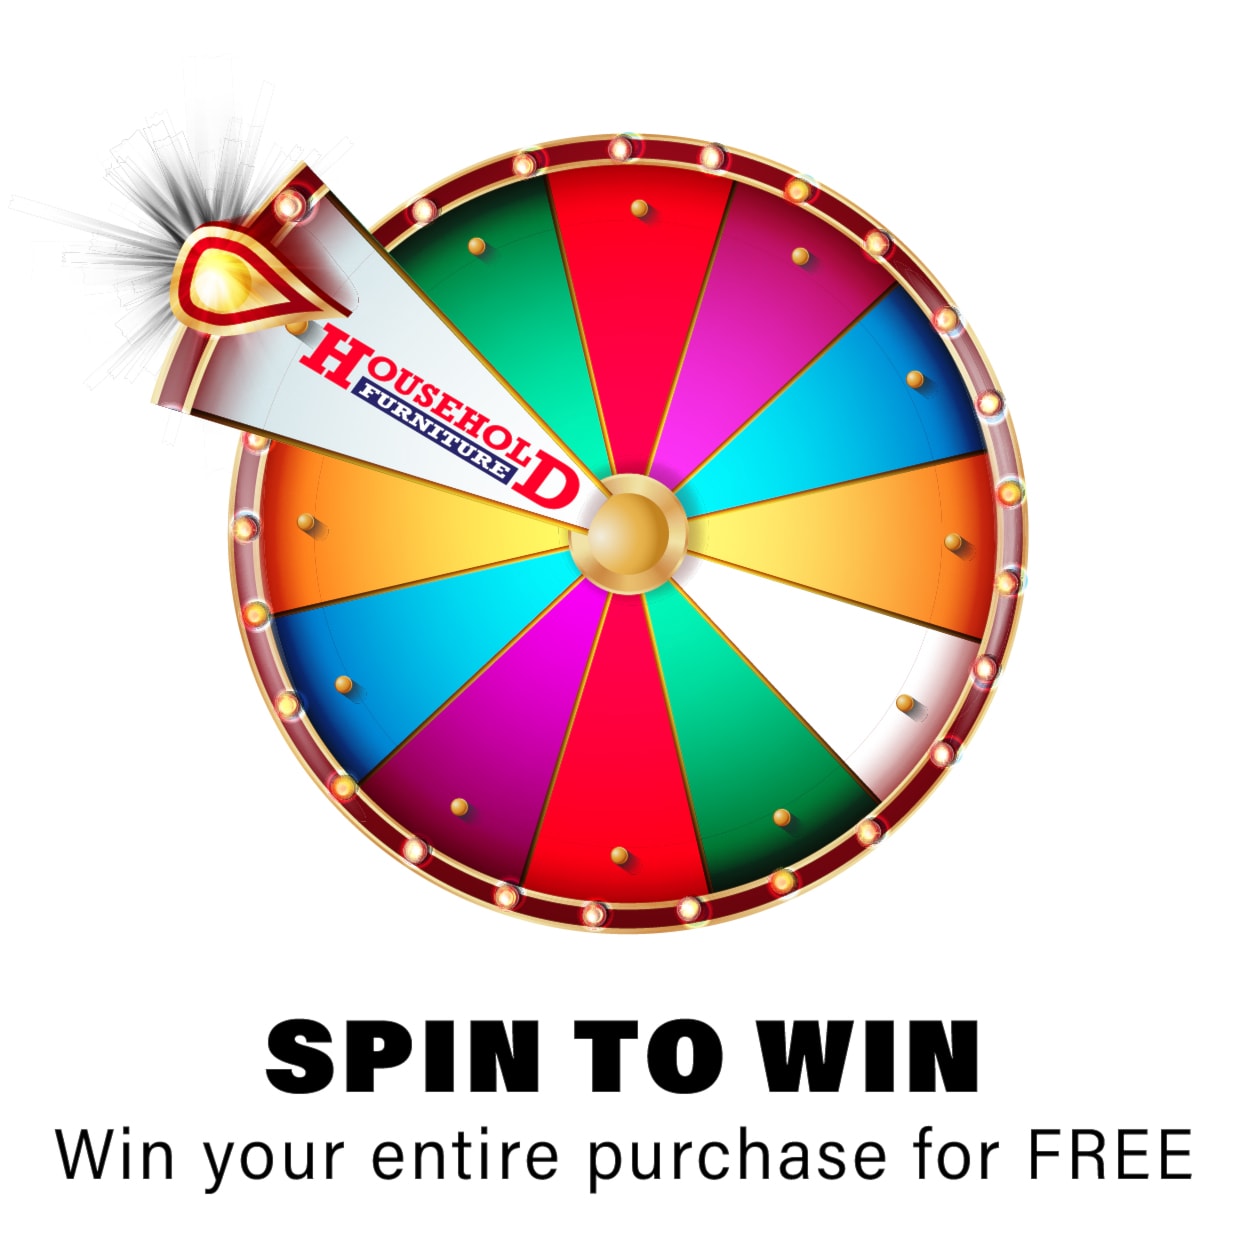 spin to win free furniture